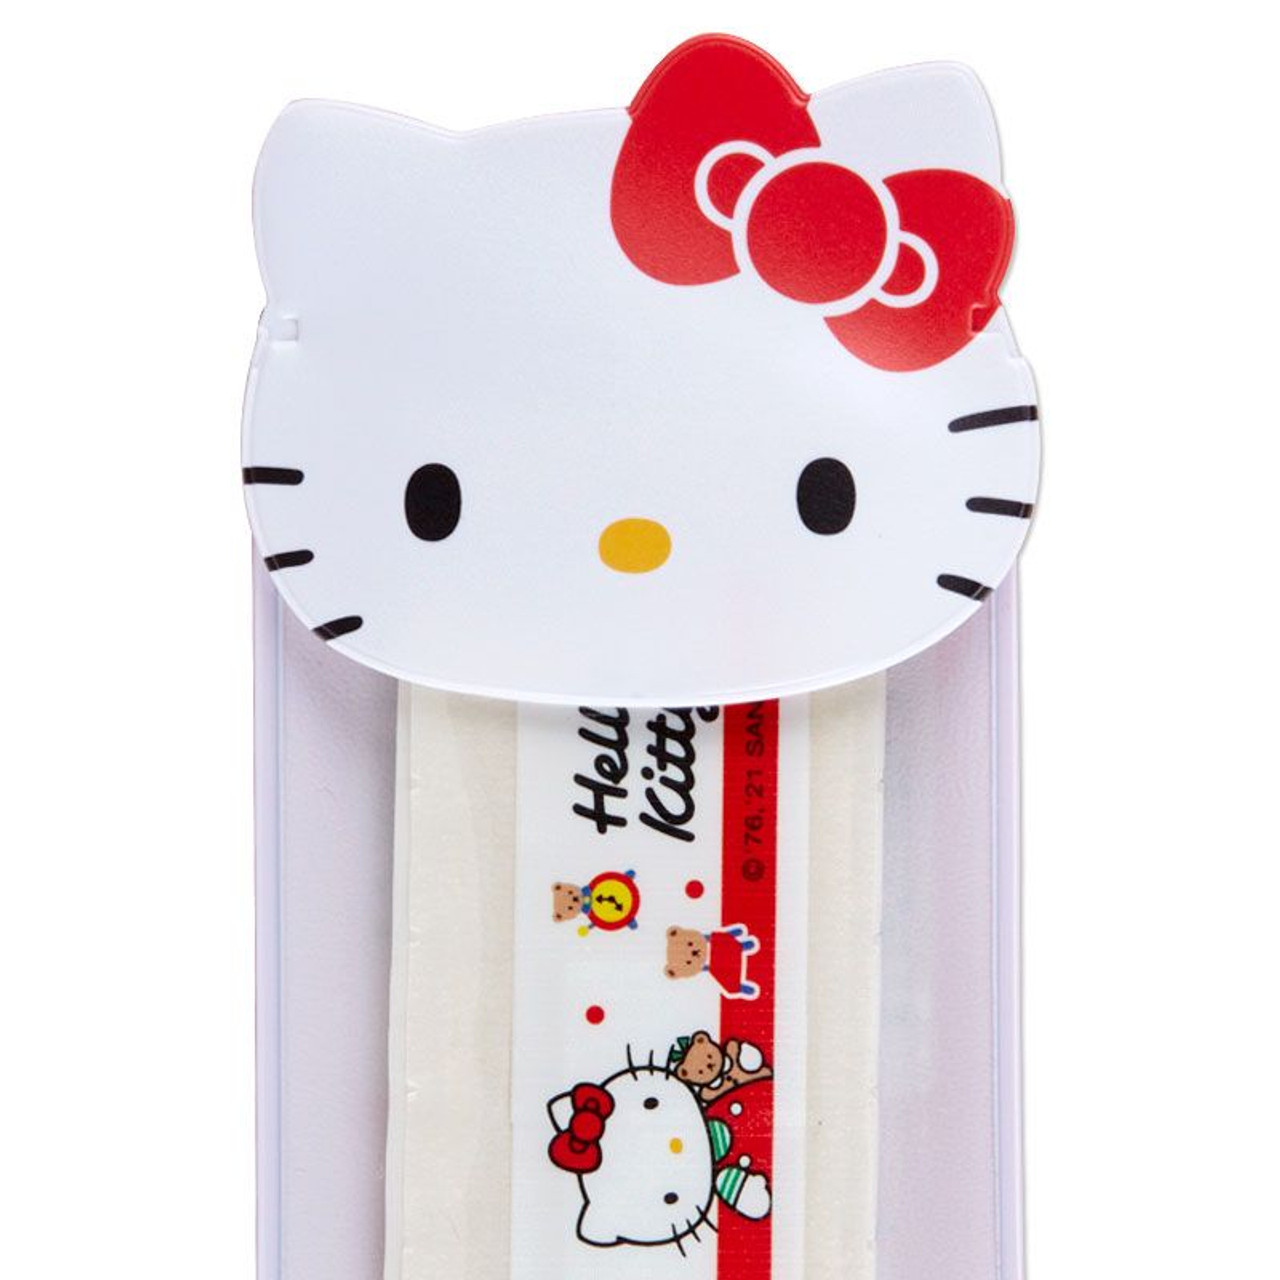 Band-Aid with Case Hello Kitty